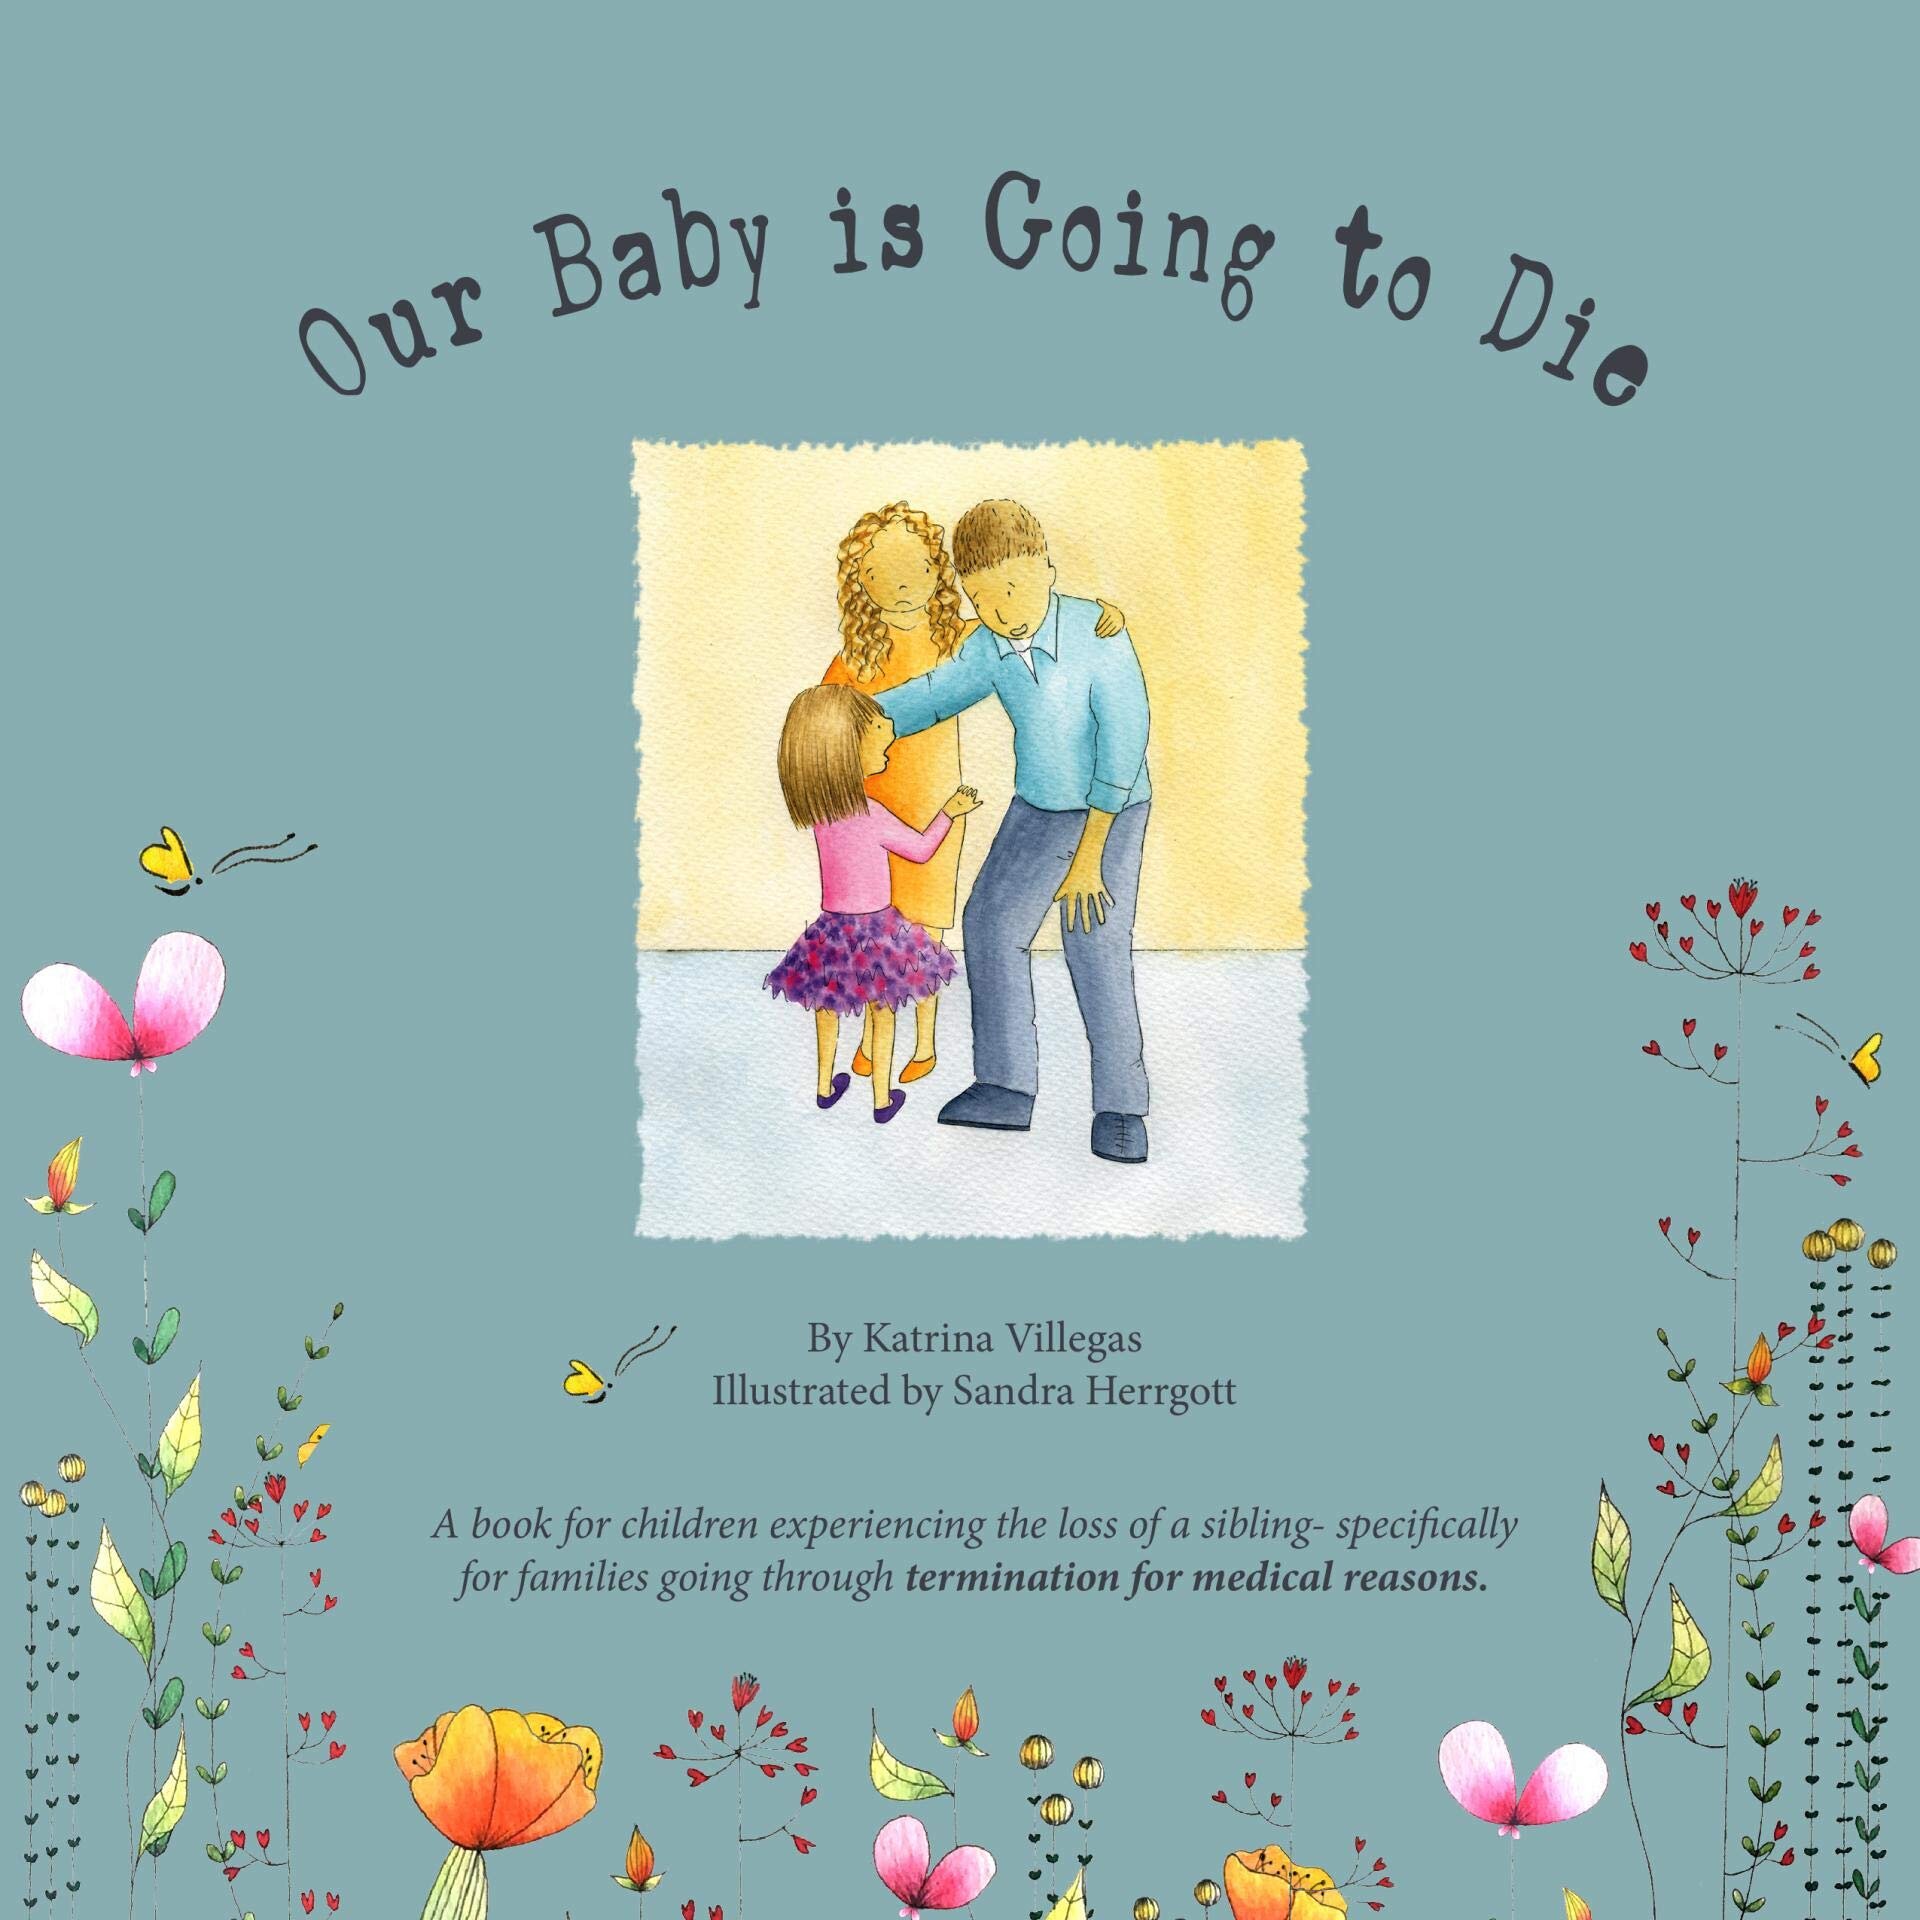 Our Baby is Going to Die: The road of grief before the death of a sibling. (Copy) (Copy)